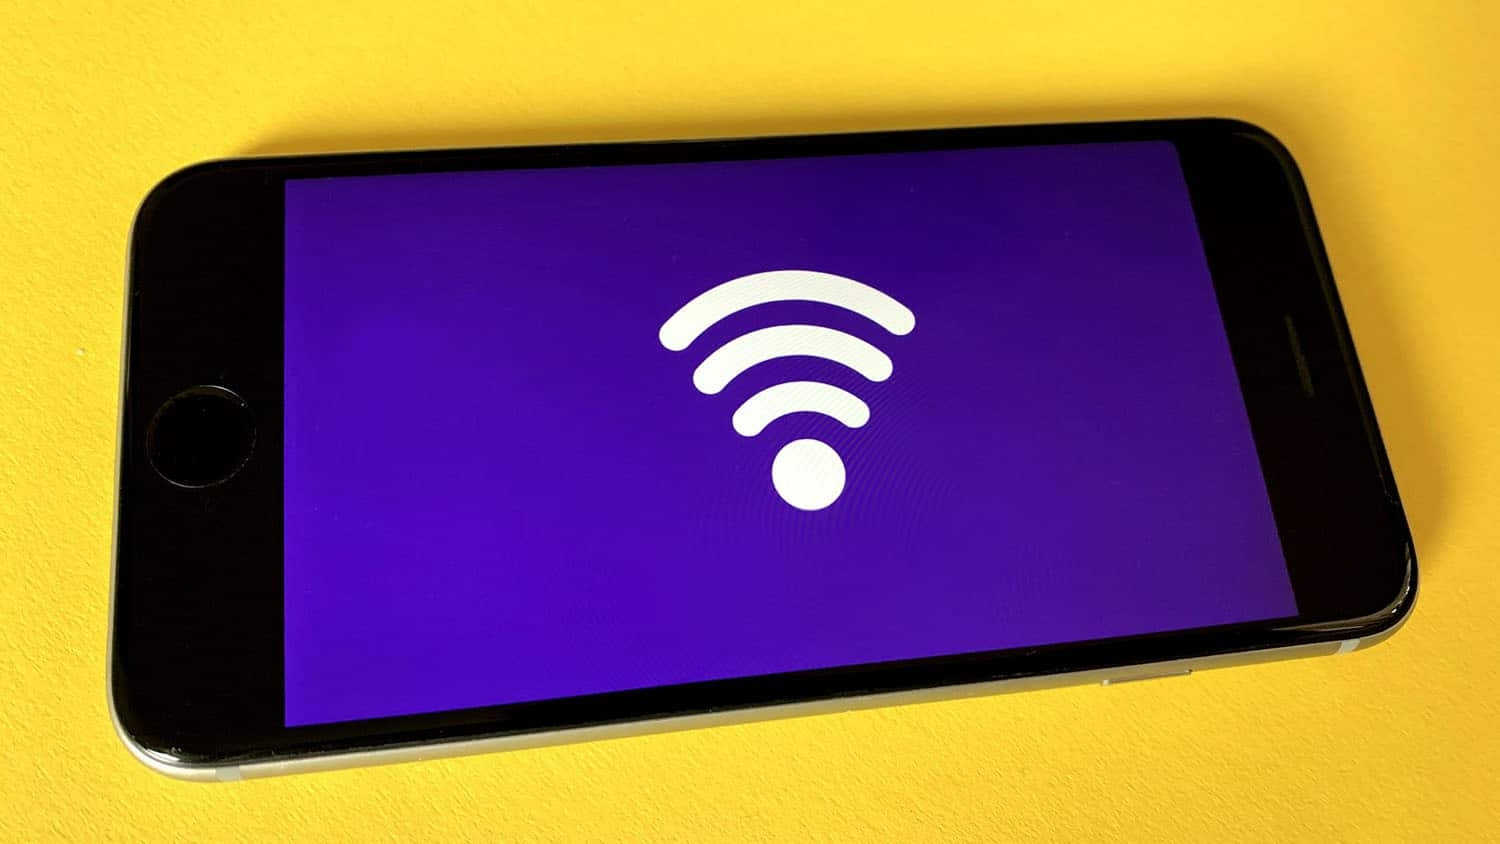 a smartphone displays the wi-fi symbol on its screen